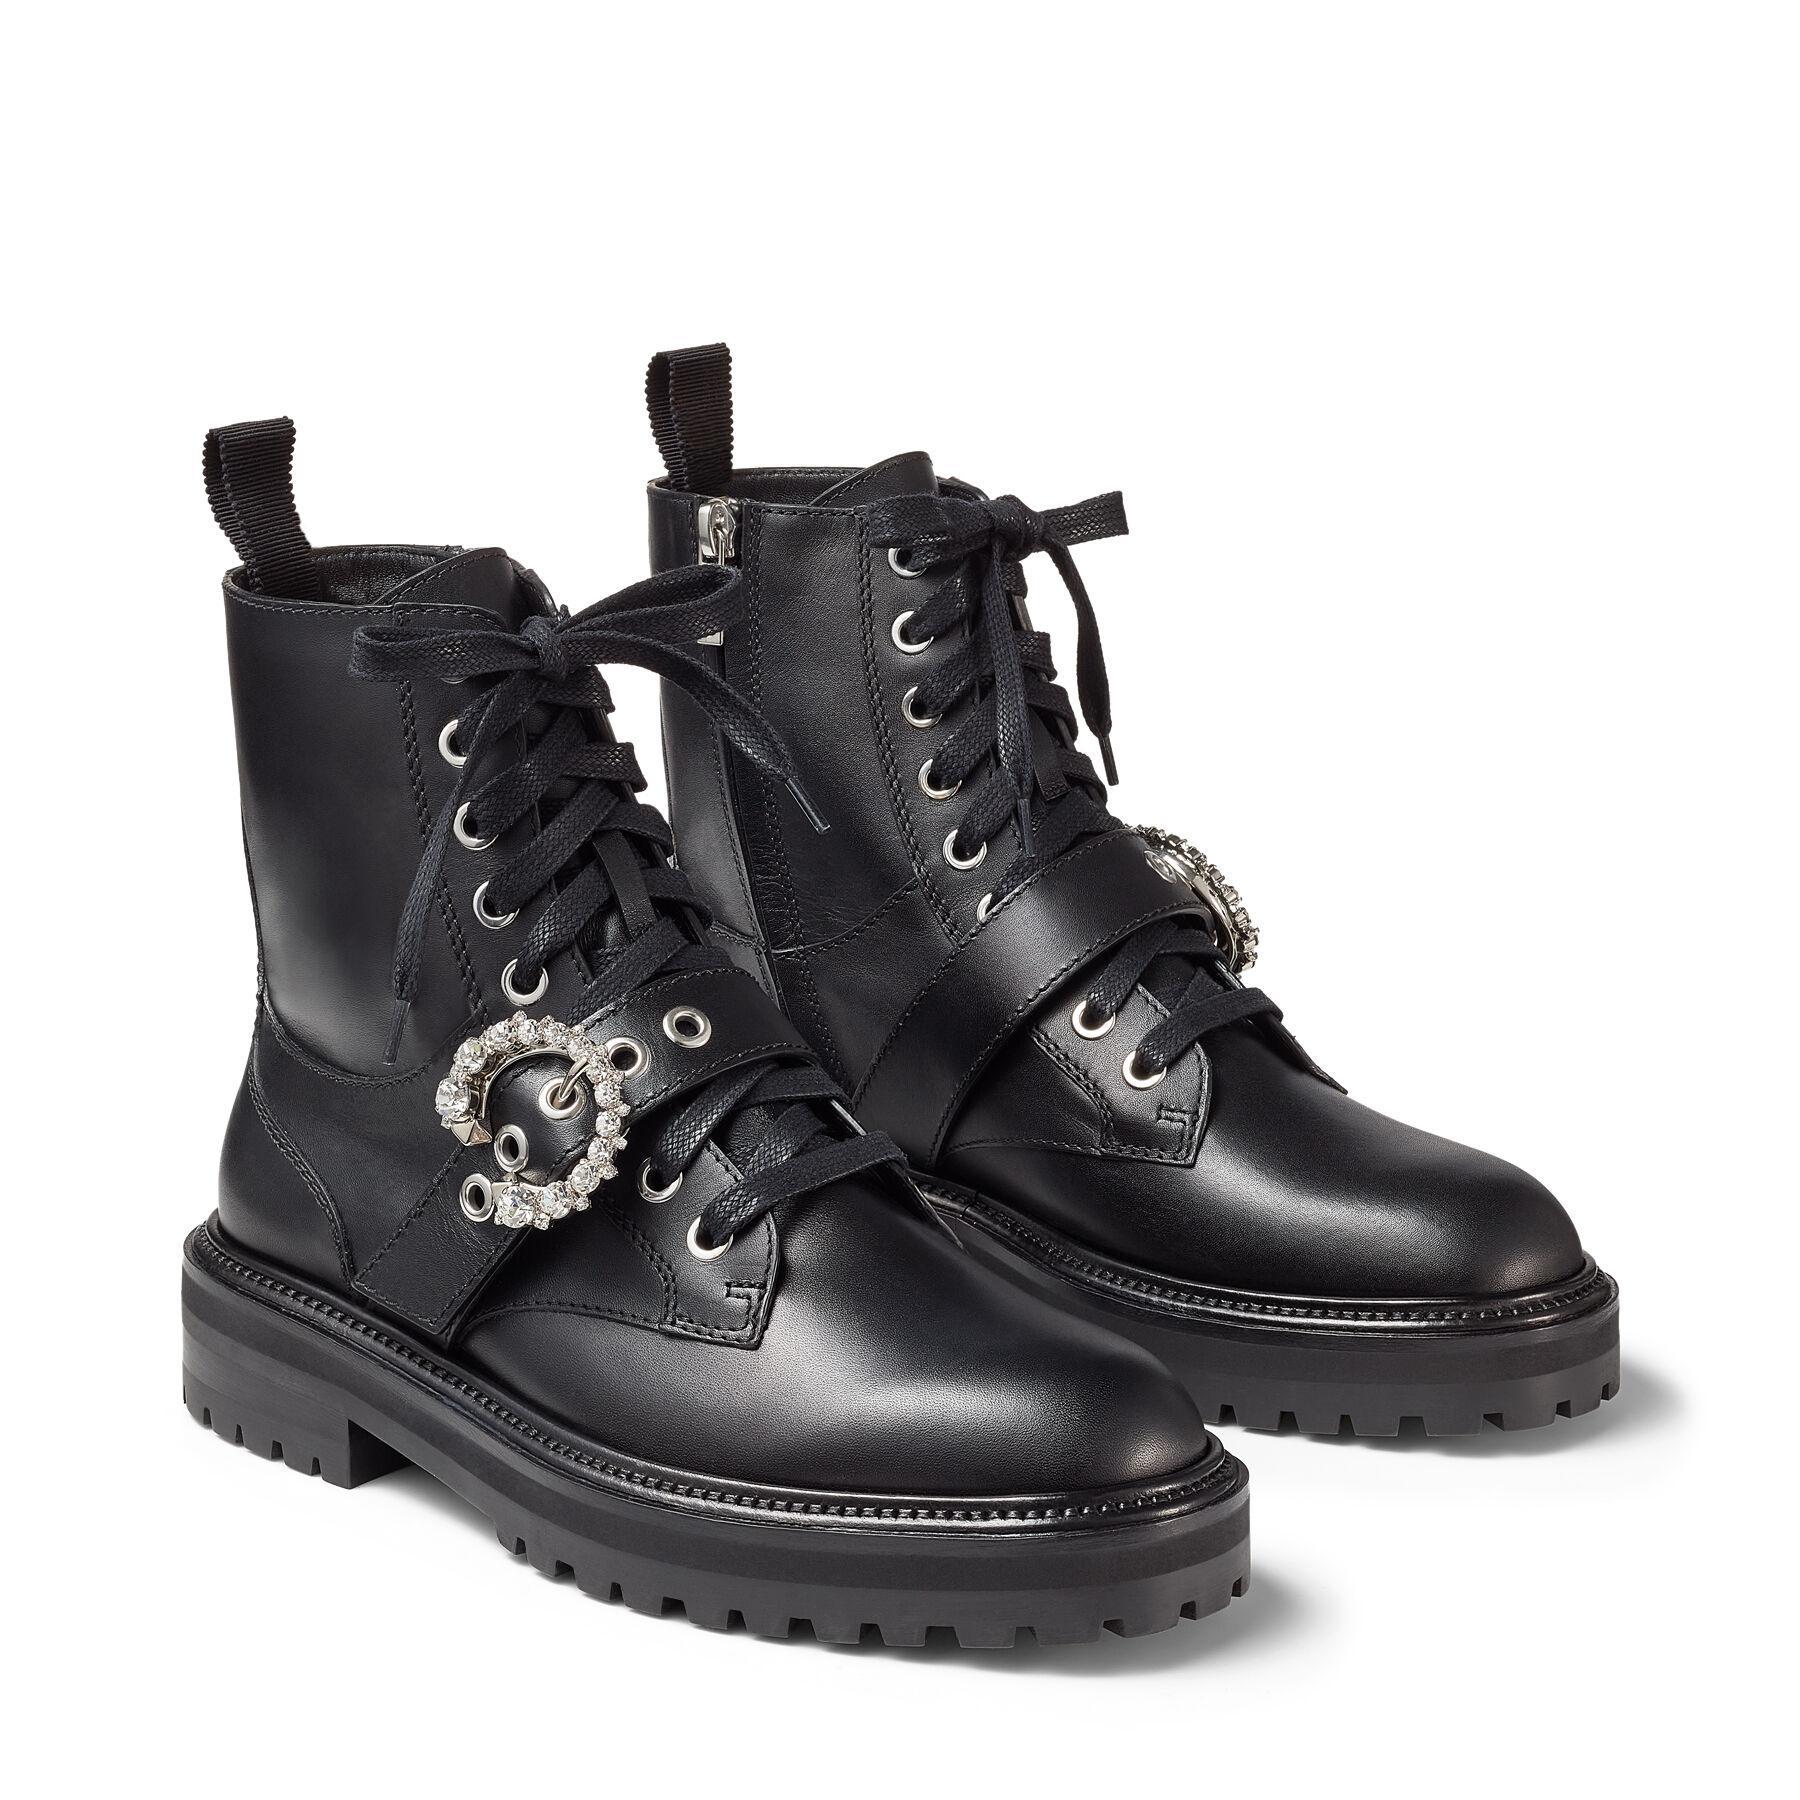 

Fashion Season Shoes London Cora Flat Combat Boots Black Soft Calf Leather Sparkling Crystal Buckle Italy Chunky Sole JIMMYs CHOOs mka